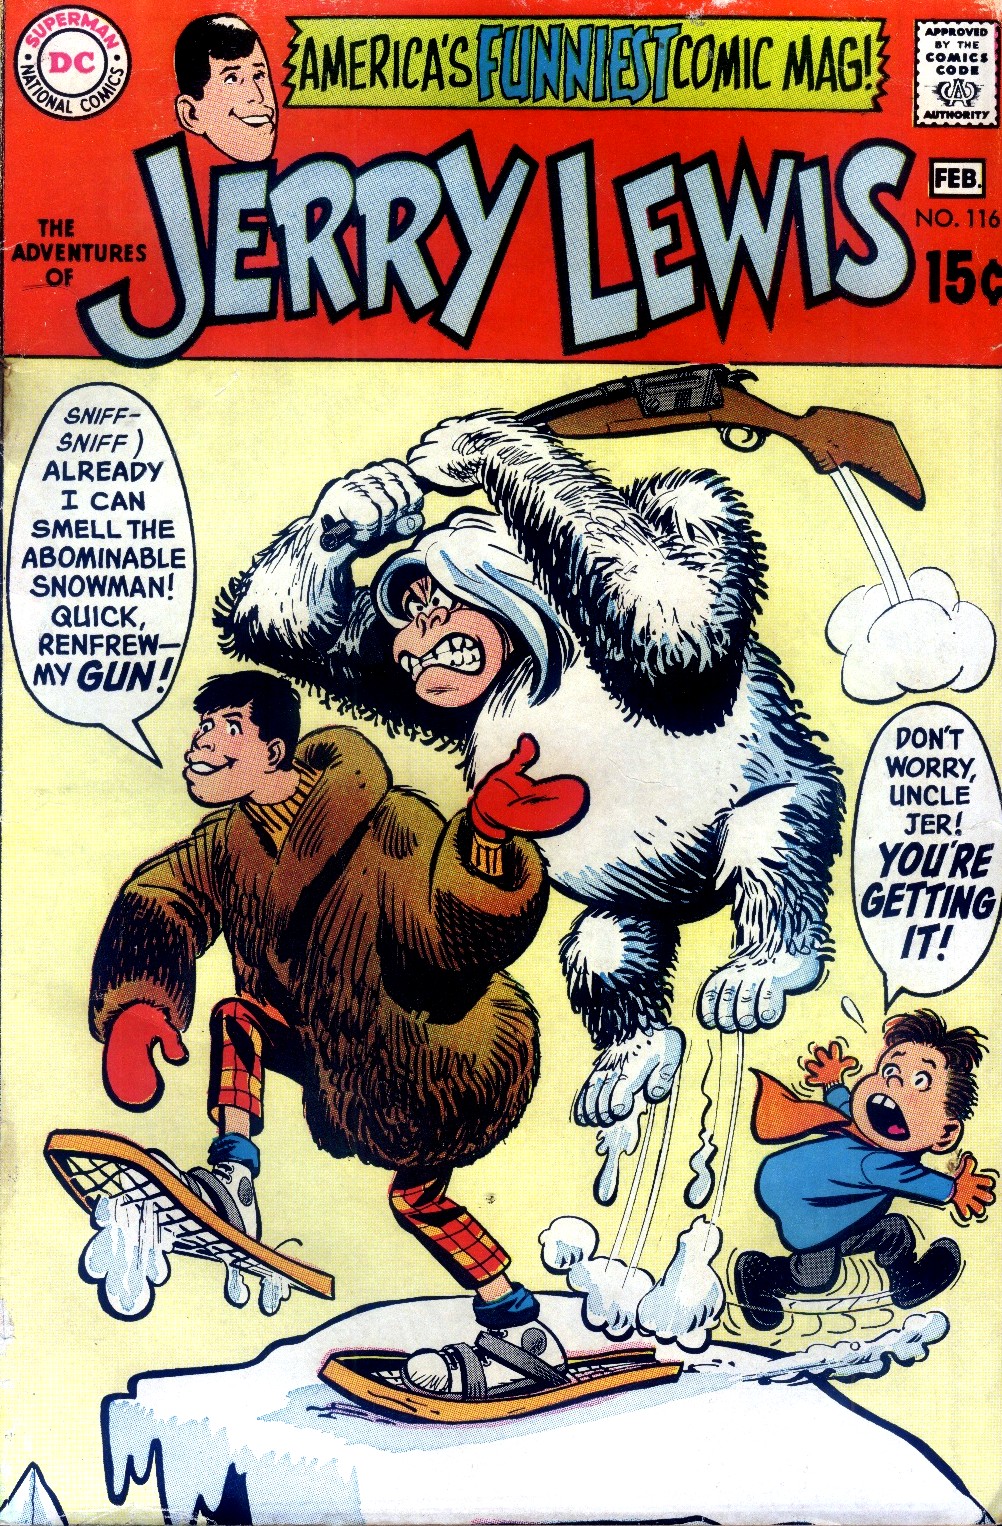 Read online The Adventures of Jerry Lewis comic -  Issue #116 - 1